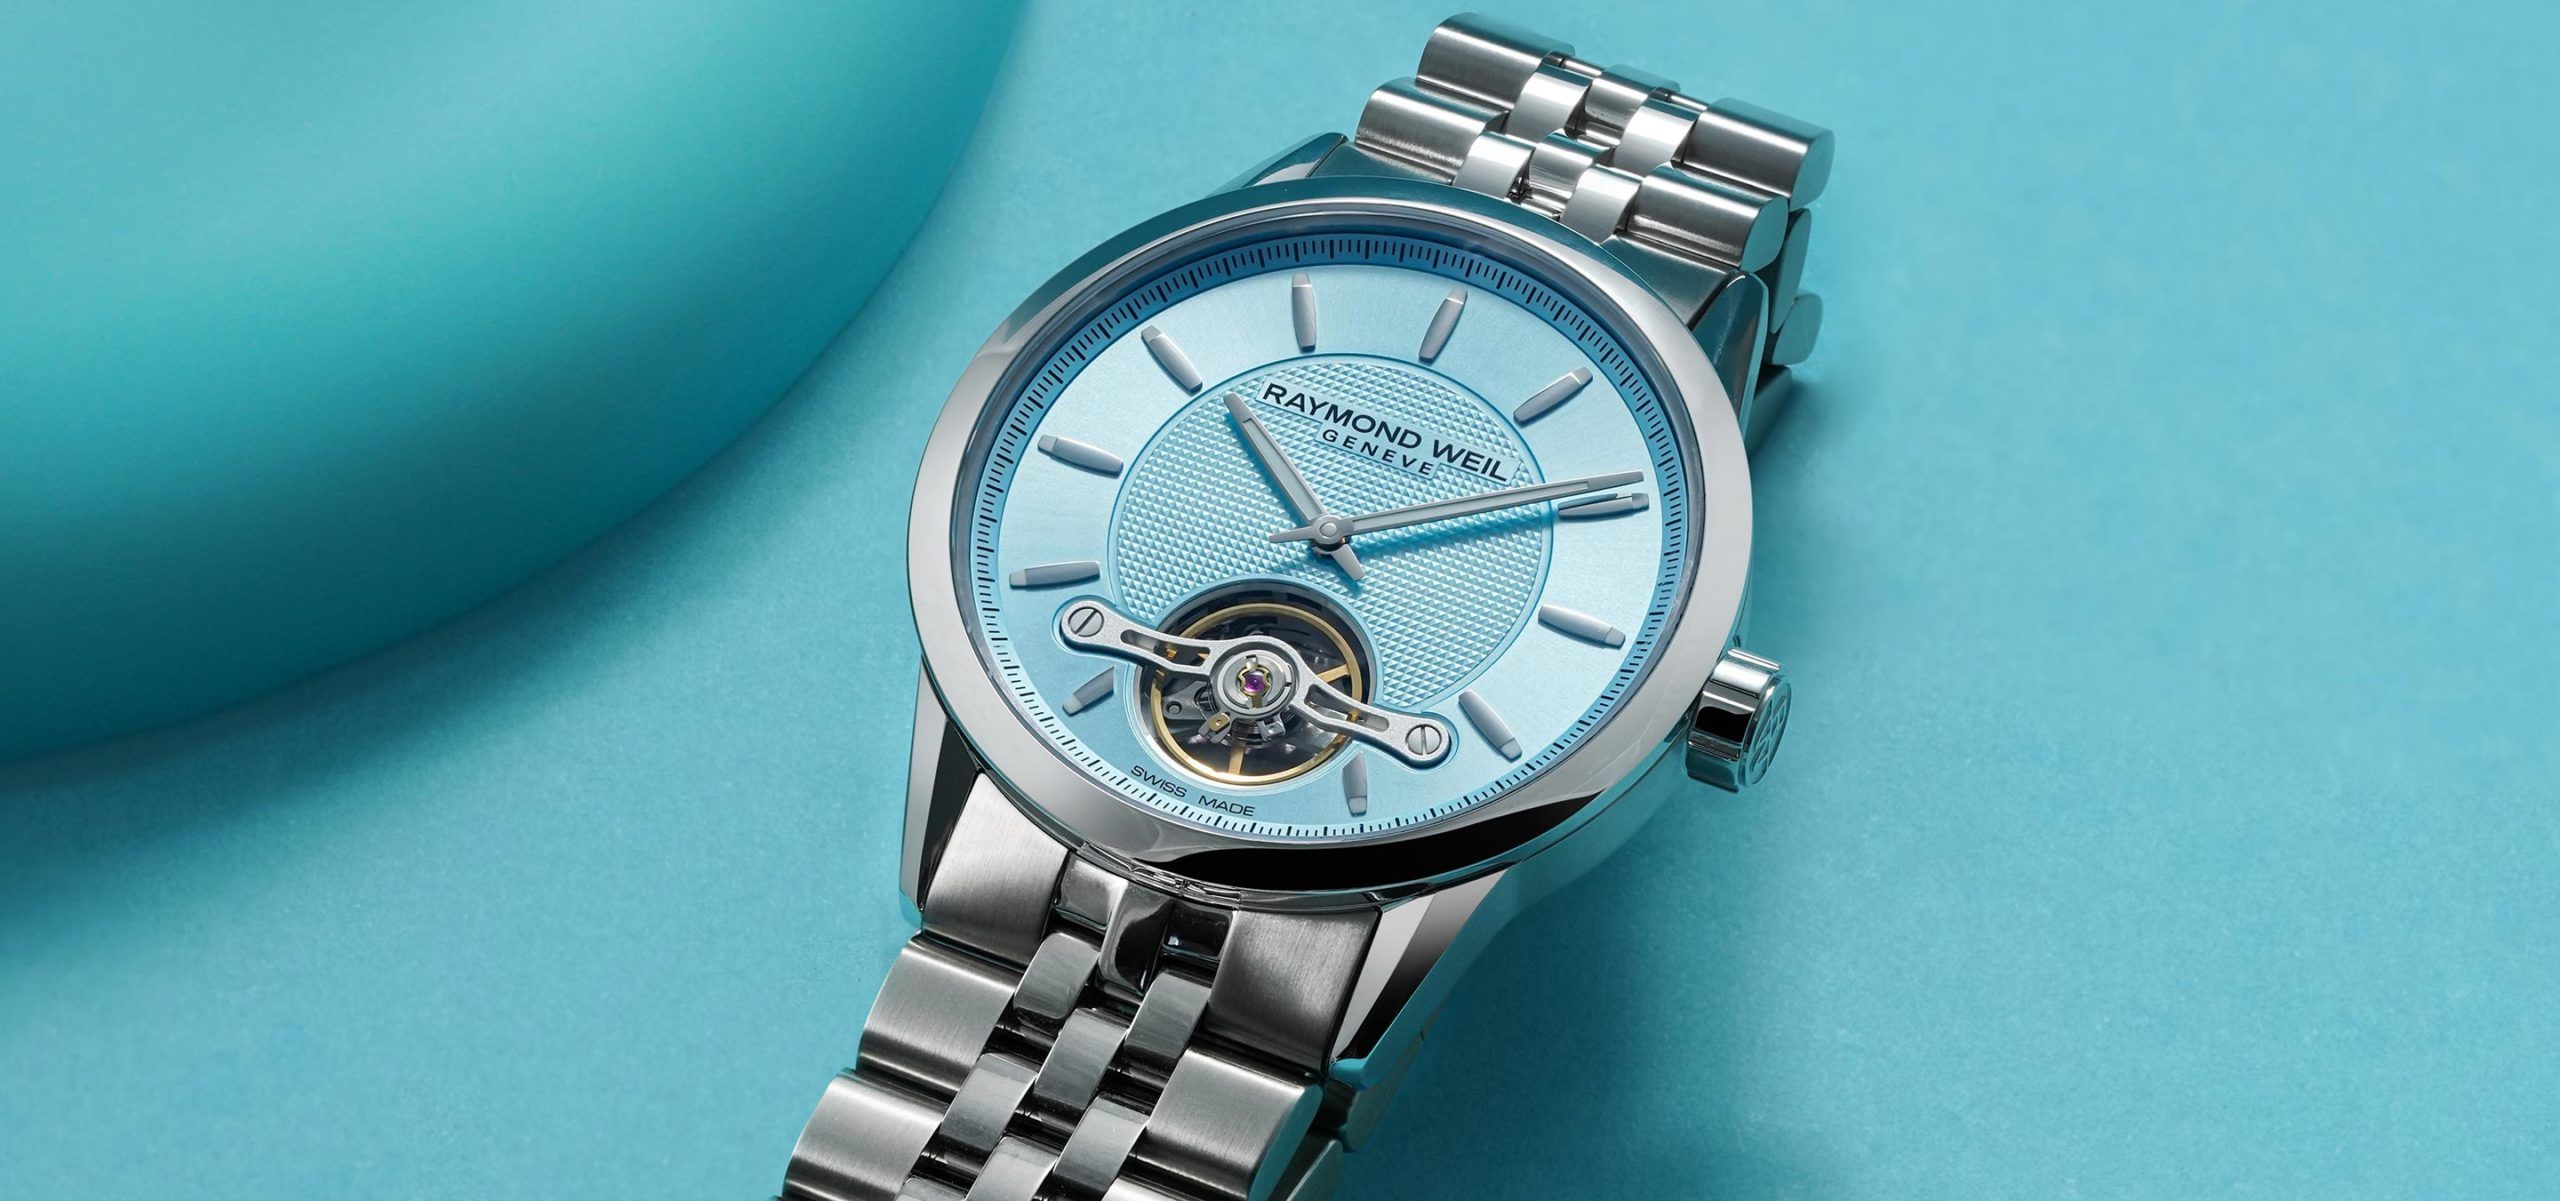 Raymond Weil Drop The Pin On India With Their Latest Freelancer Limited Edition